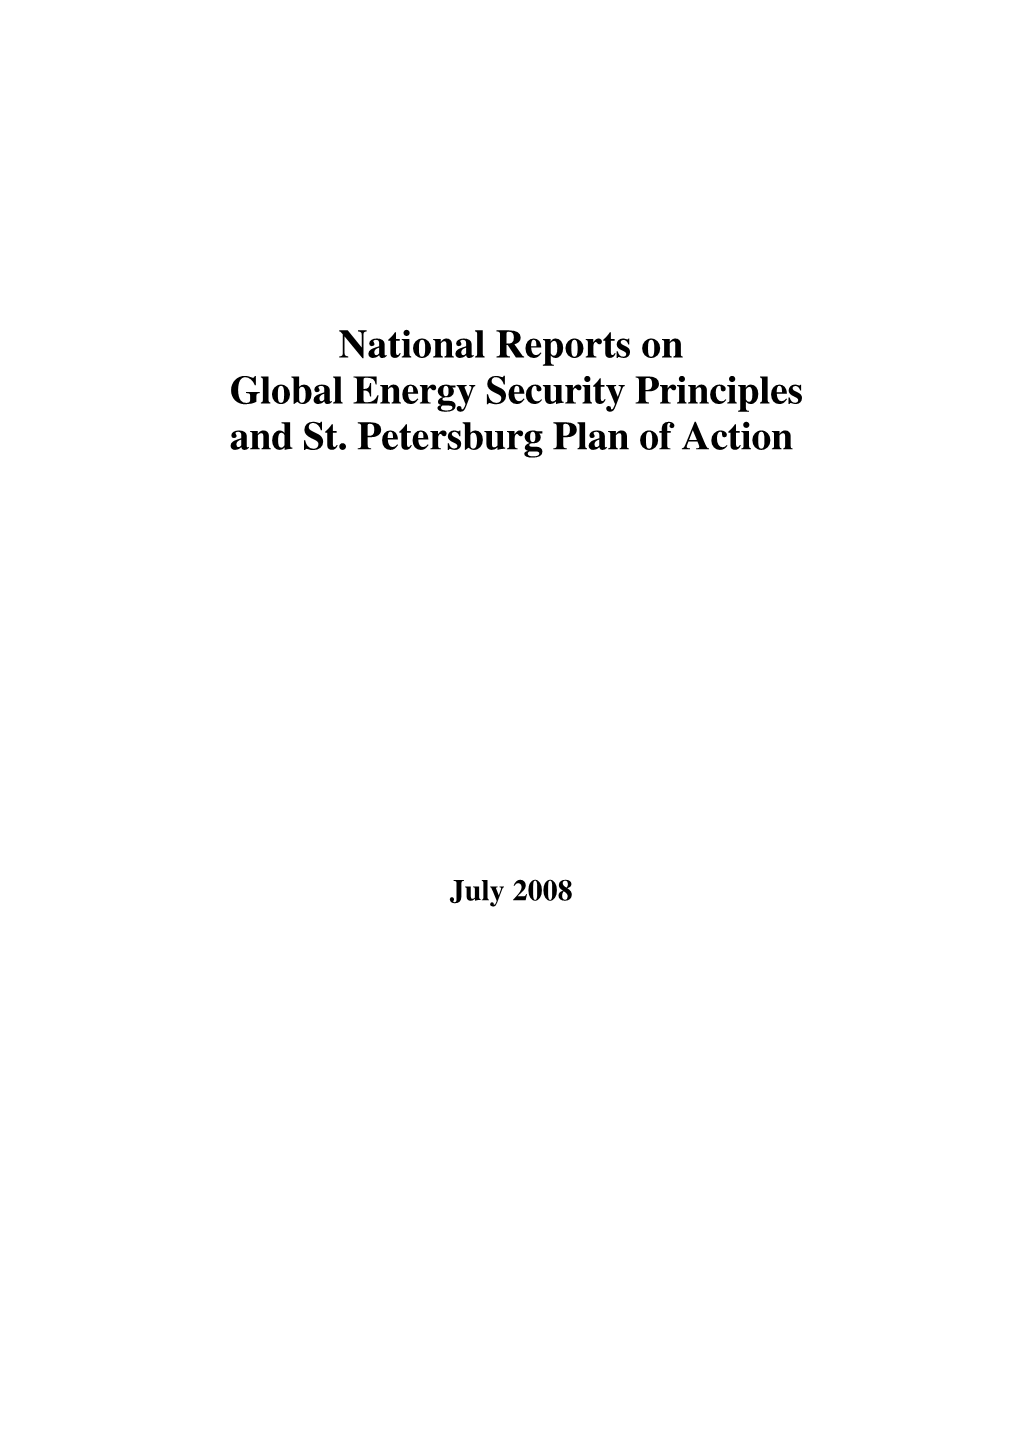 National Reports on Global Energy Security Principles and St. Petersburg Plan of Action